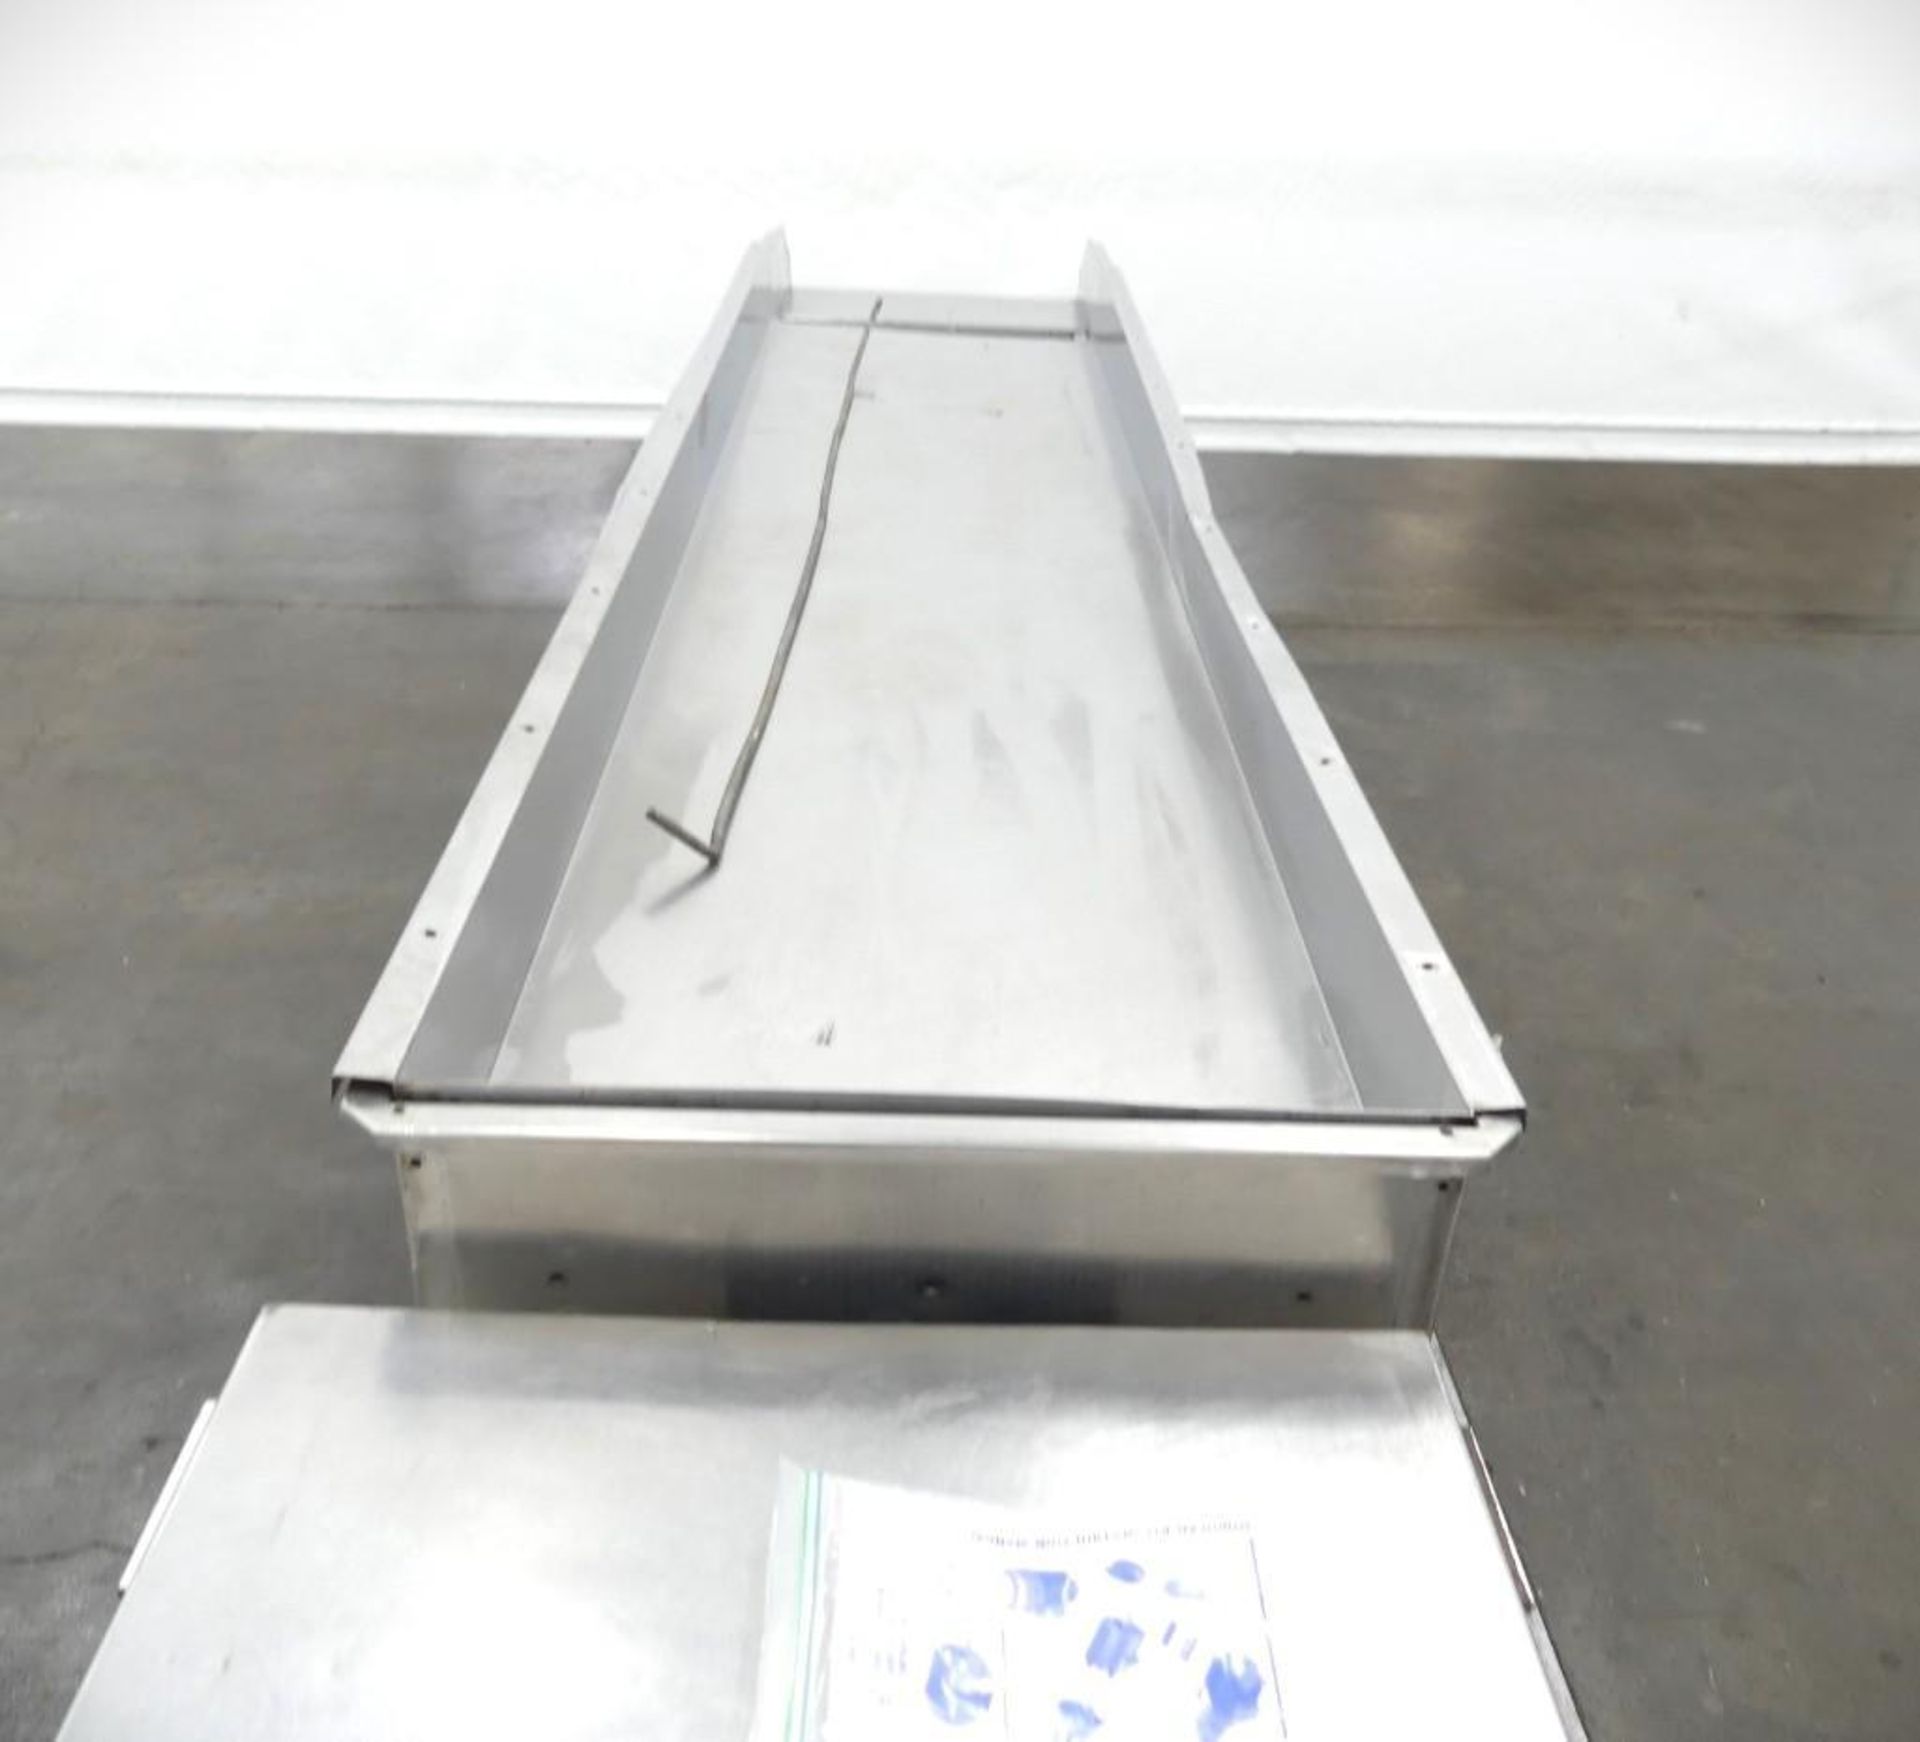 8'L x 24"W Linear Vibratory Feeder - Image 7 of 23